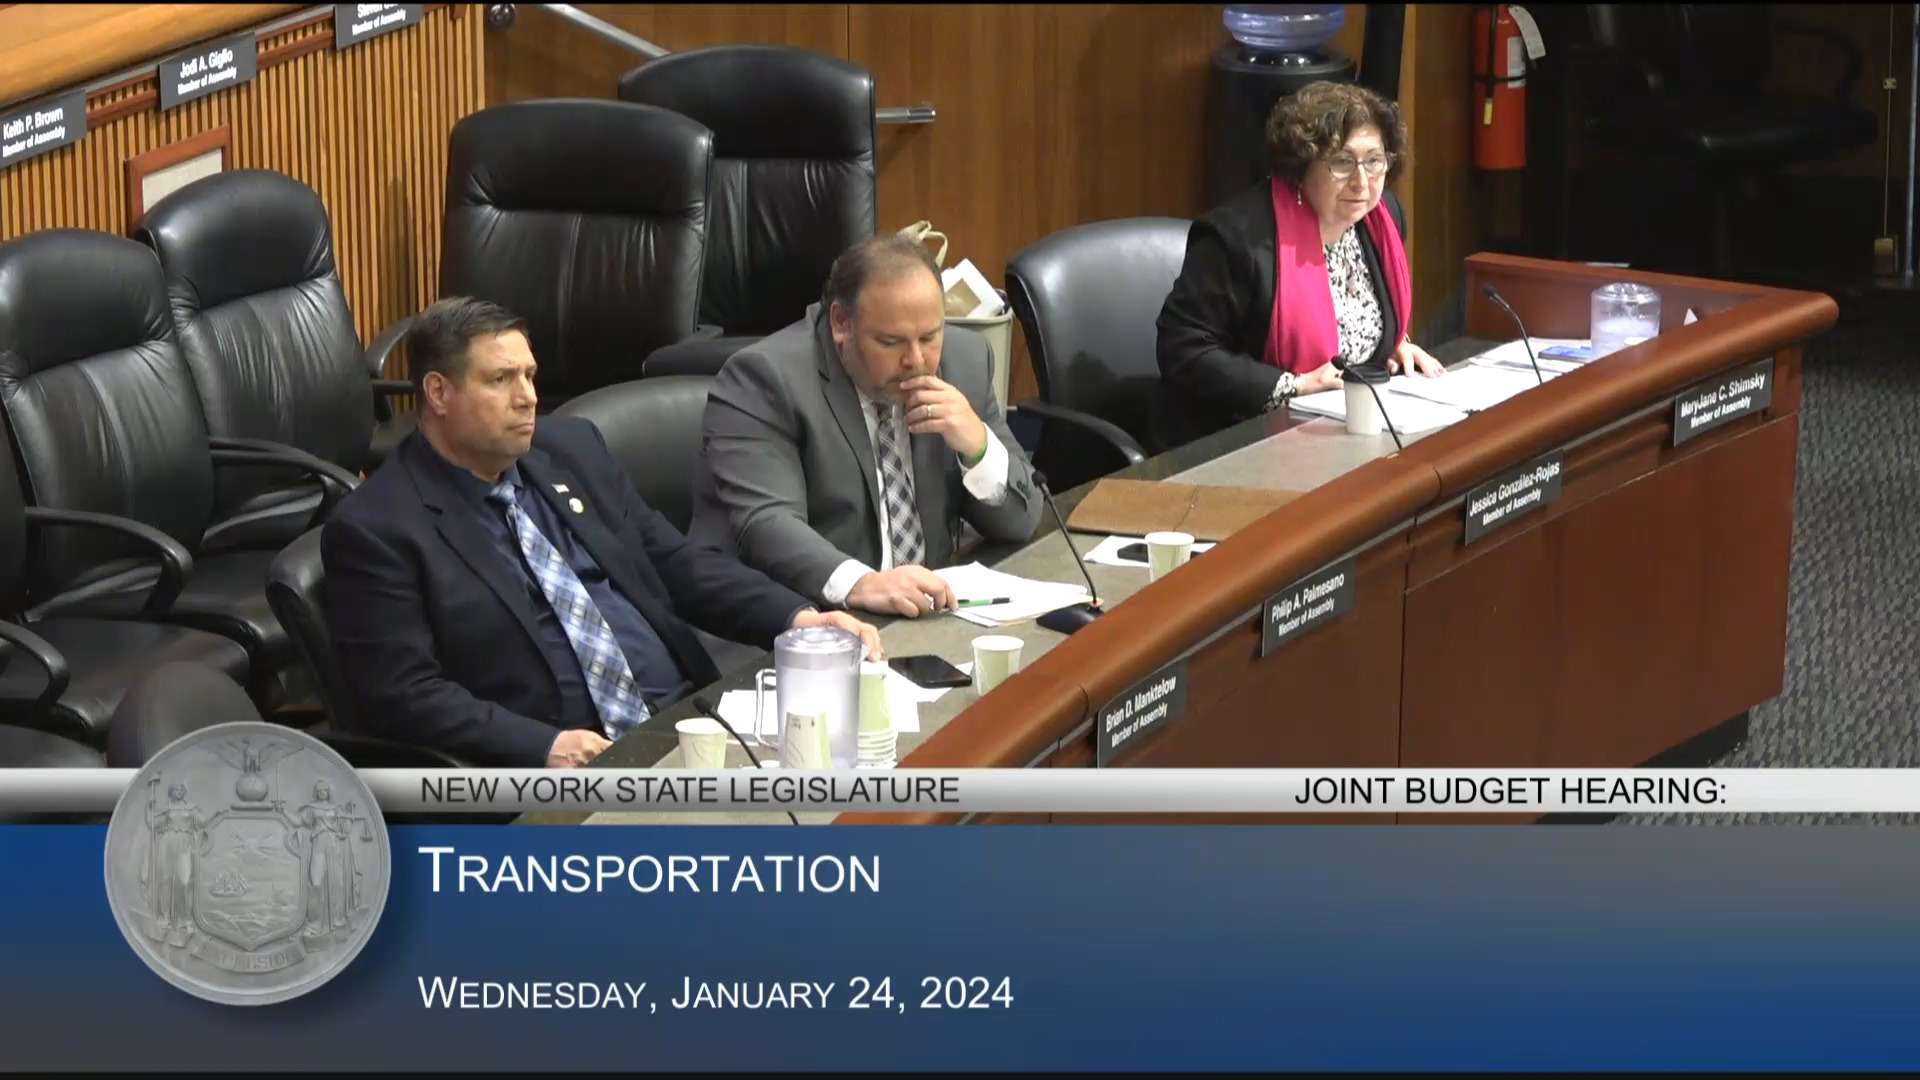 DMV Commissioner and Thruway Authority Director Testify During a Joint Budget Hearing on Transportation